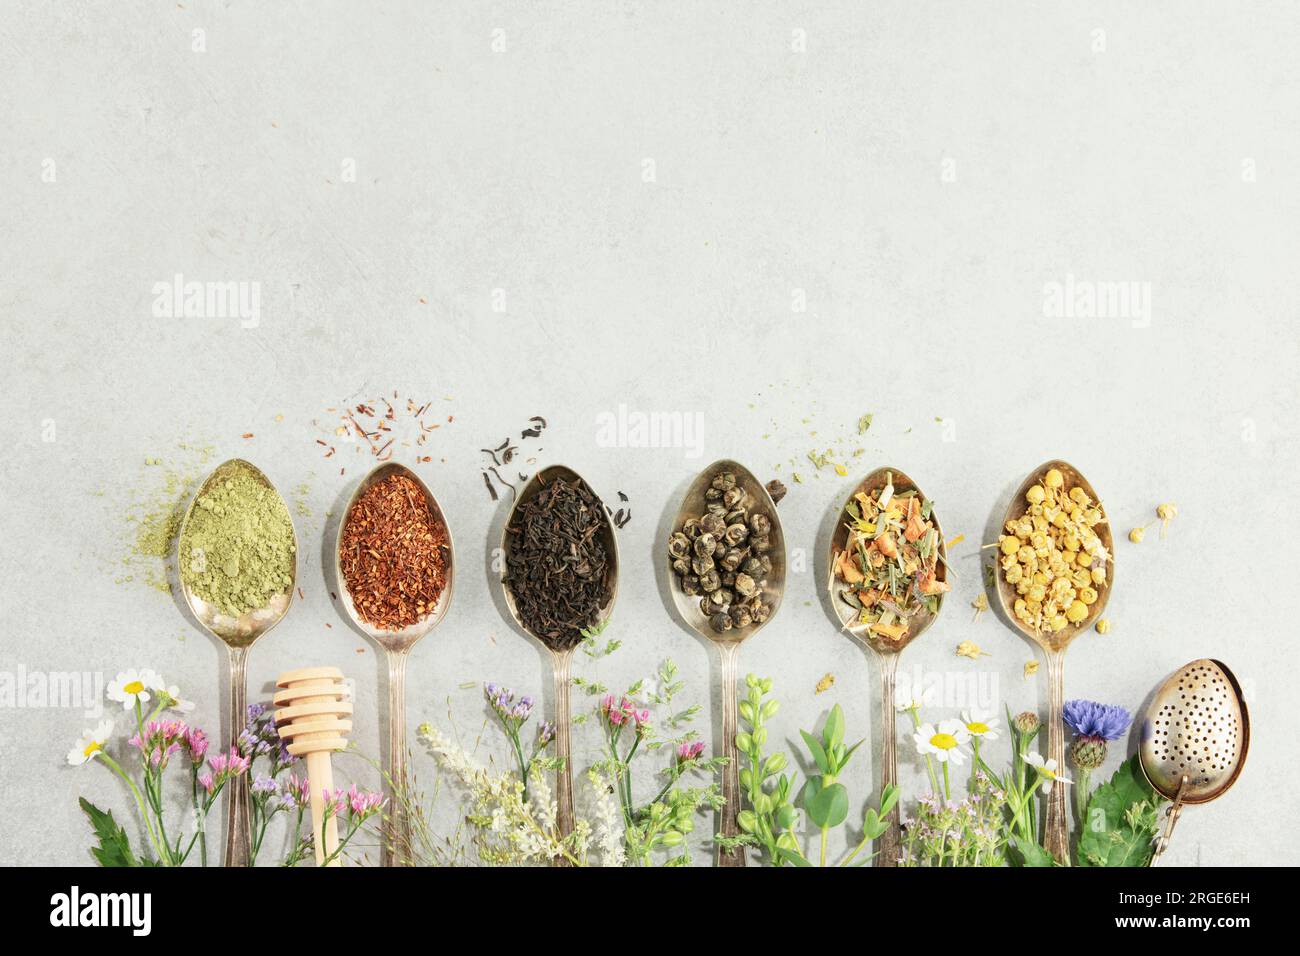 Different types of tea in vintage spoons. and Healing herbs  Flat lay, top view on concrete background. Matcha, rooibos, black, green, herbal mix and Stock Photo